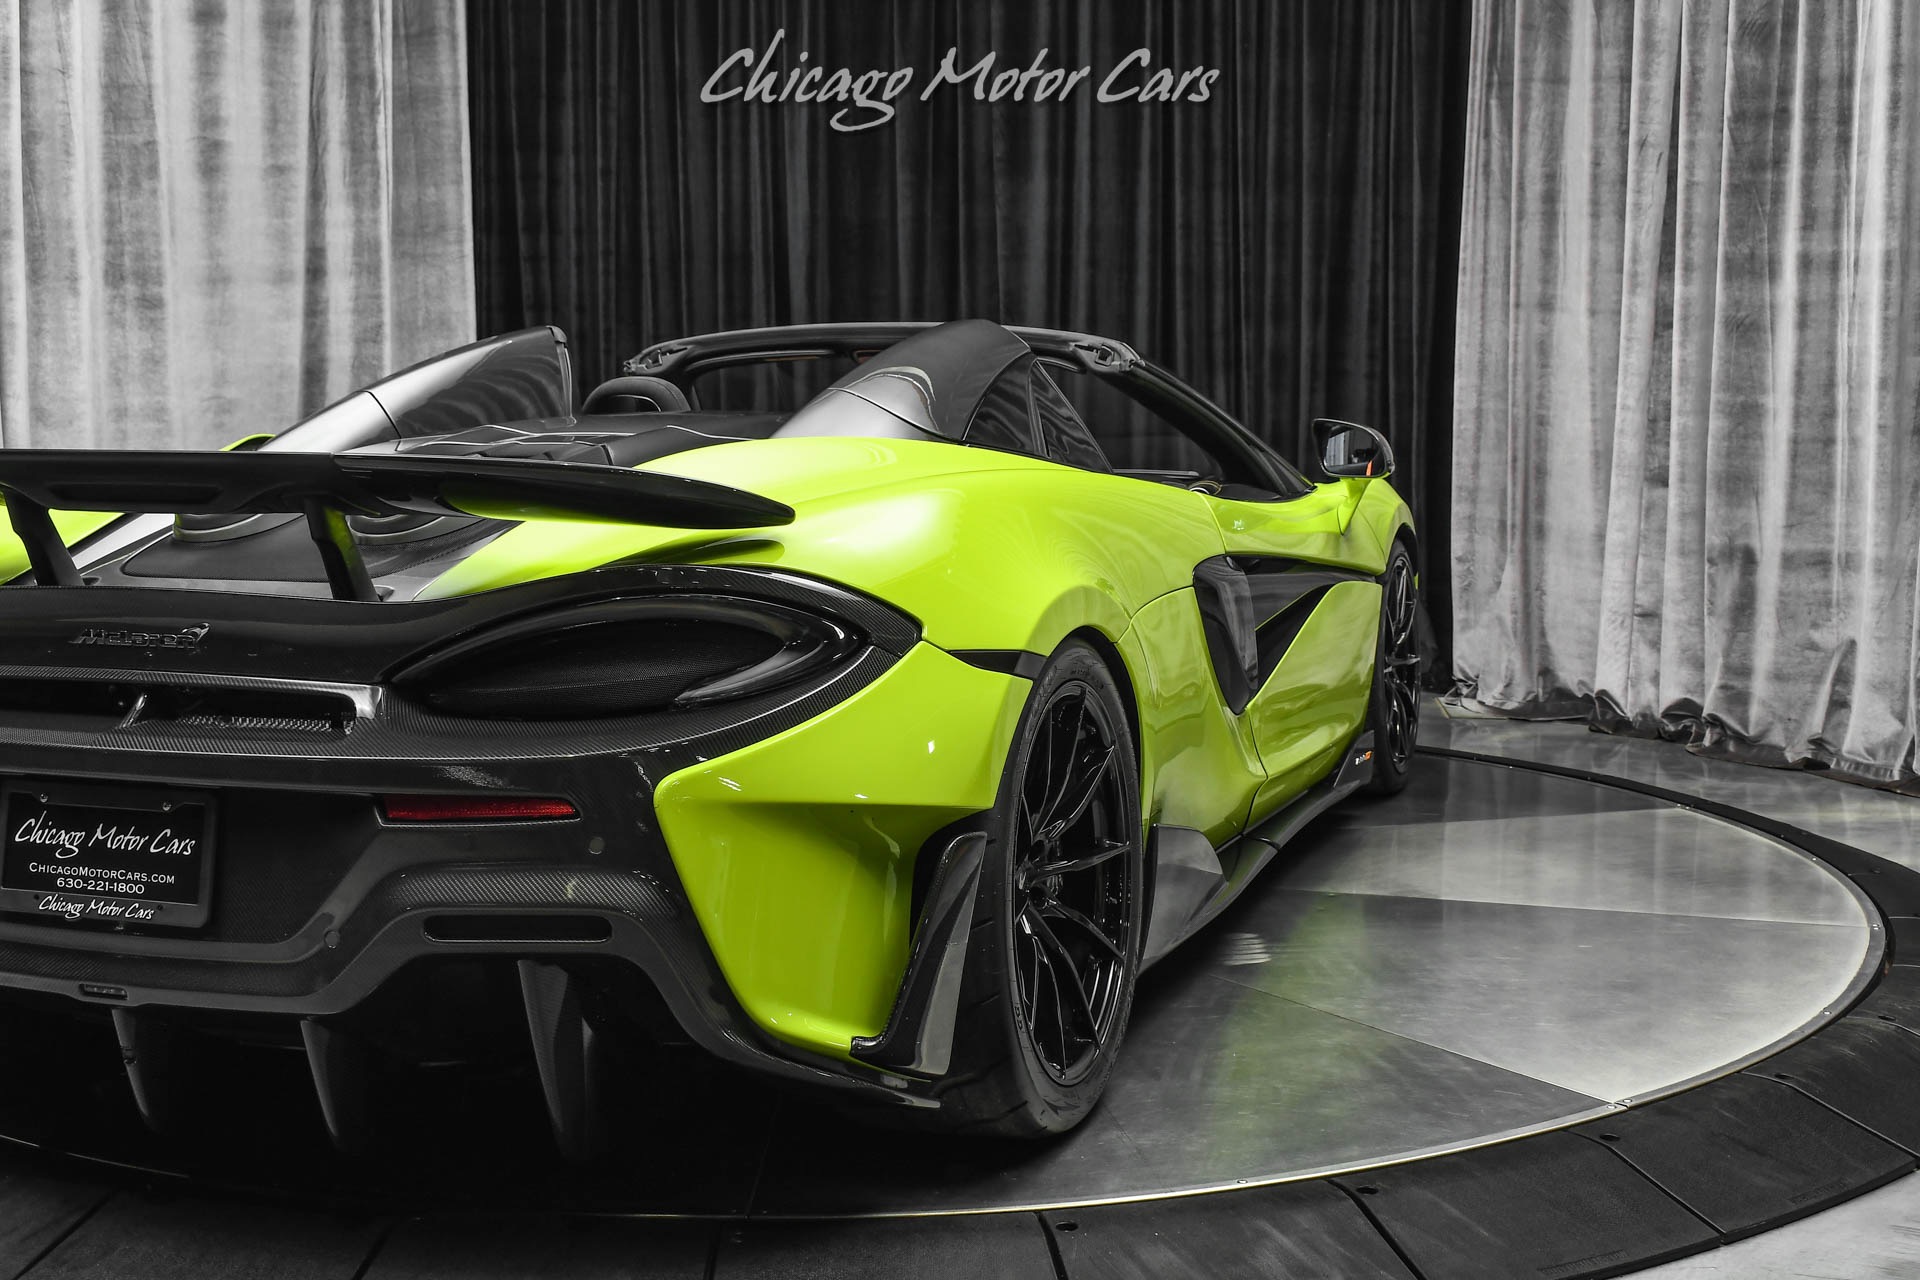 Used-2020-McLaren-600LT-Spider-Convertible-TONS-of-Carbon-Front-Lift-Limited-Edition-FULL-PPF-Lux-Pkg